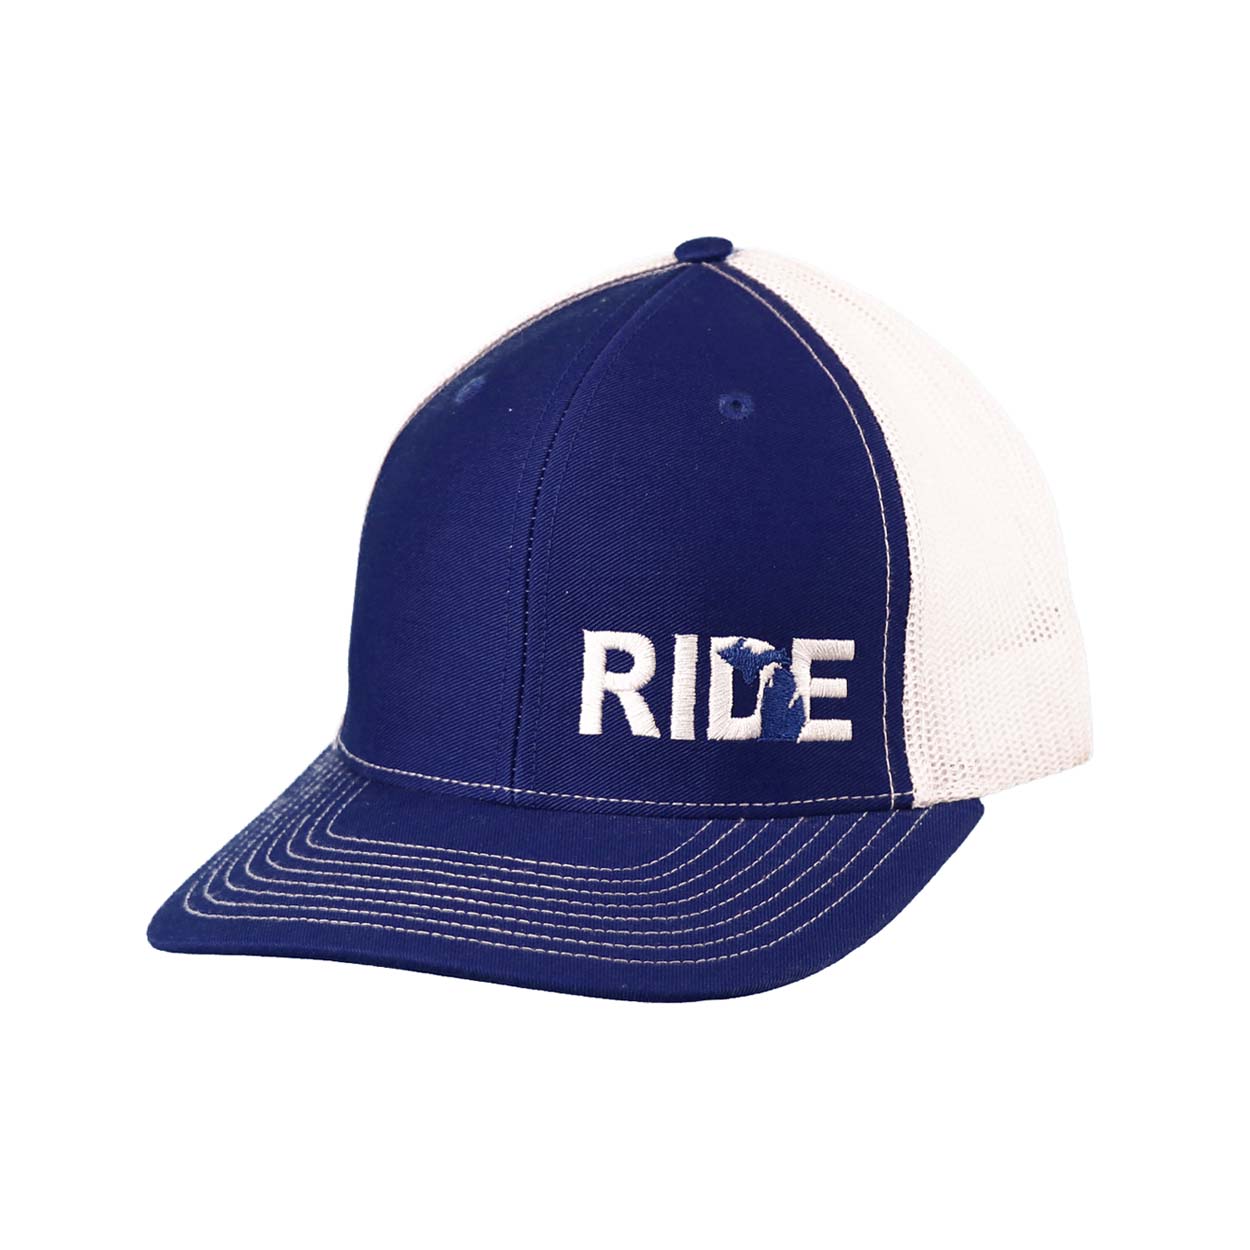 Ride Michigan Night Out Embroidered Snapback Trucker Hat Blue/White